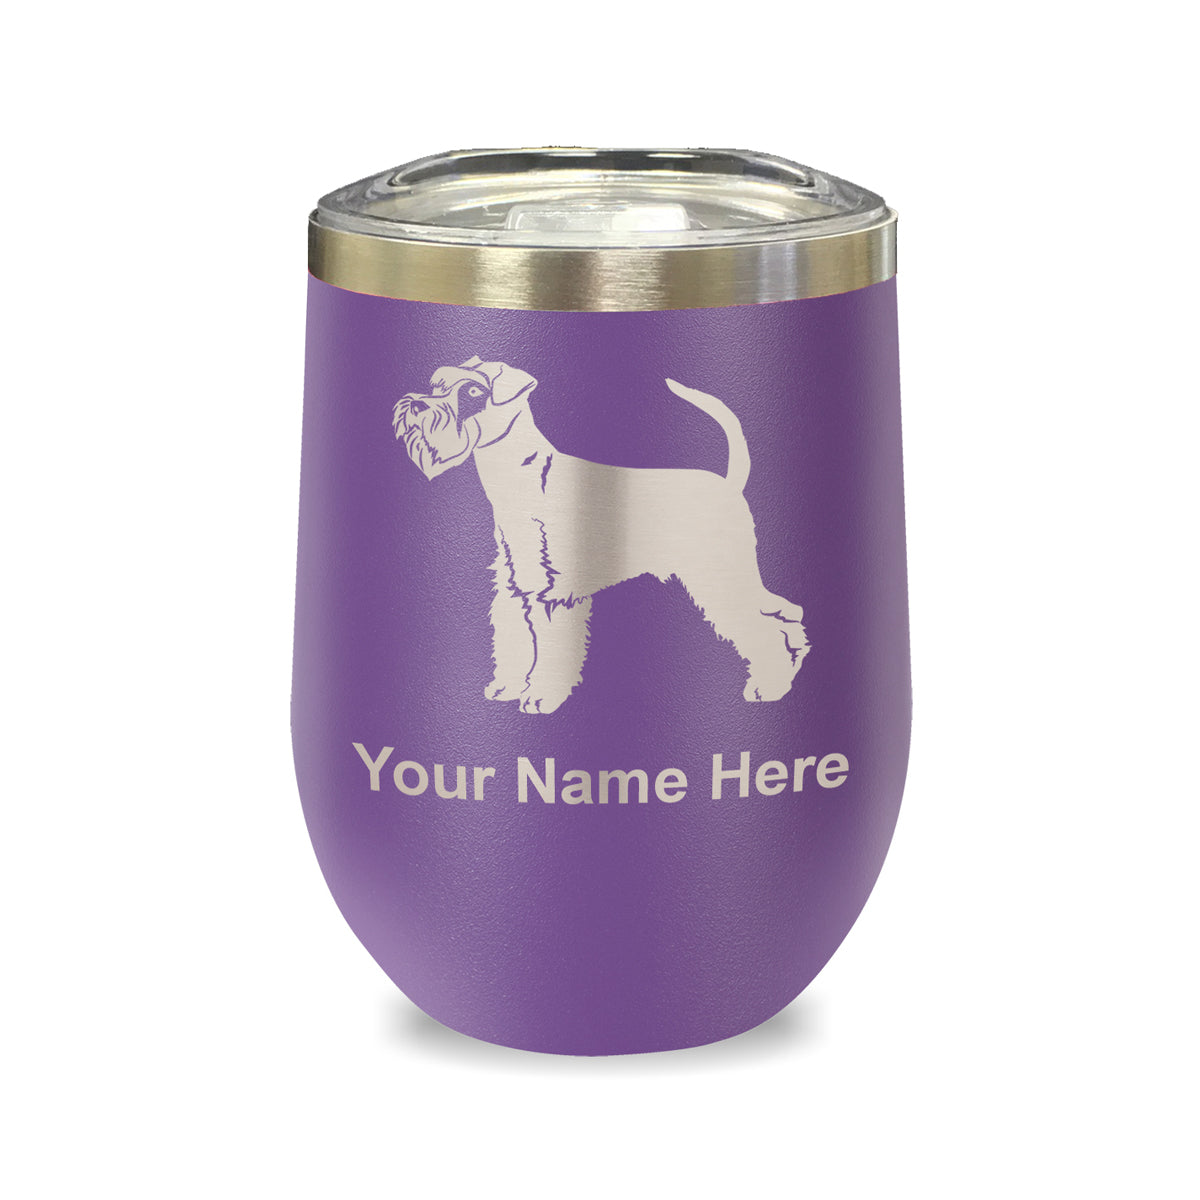 LaserGram Double Wall Stainless Steel Wine Glass, Schnauzer Dog, Personalized Engraving Included